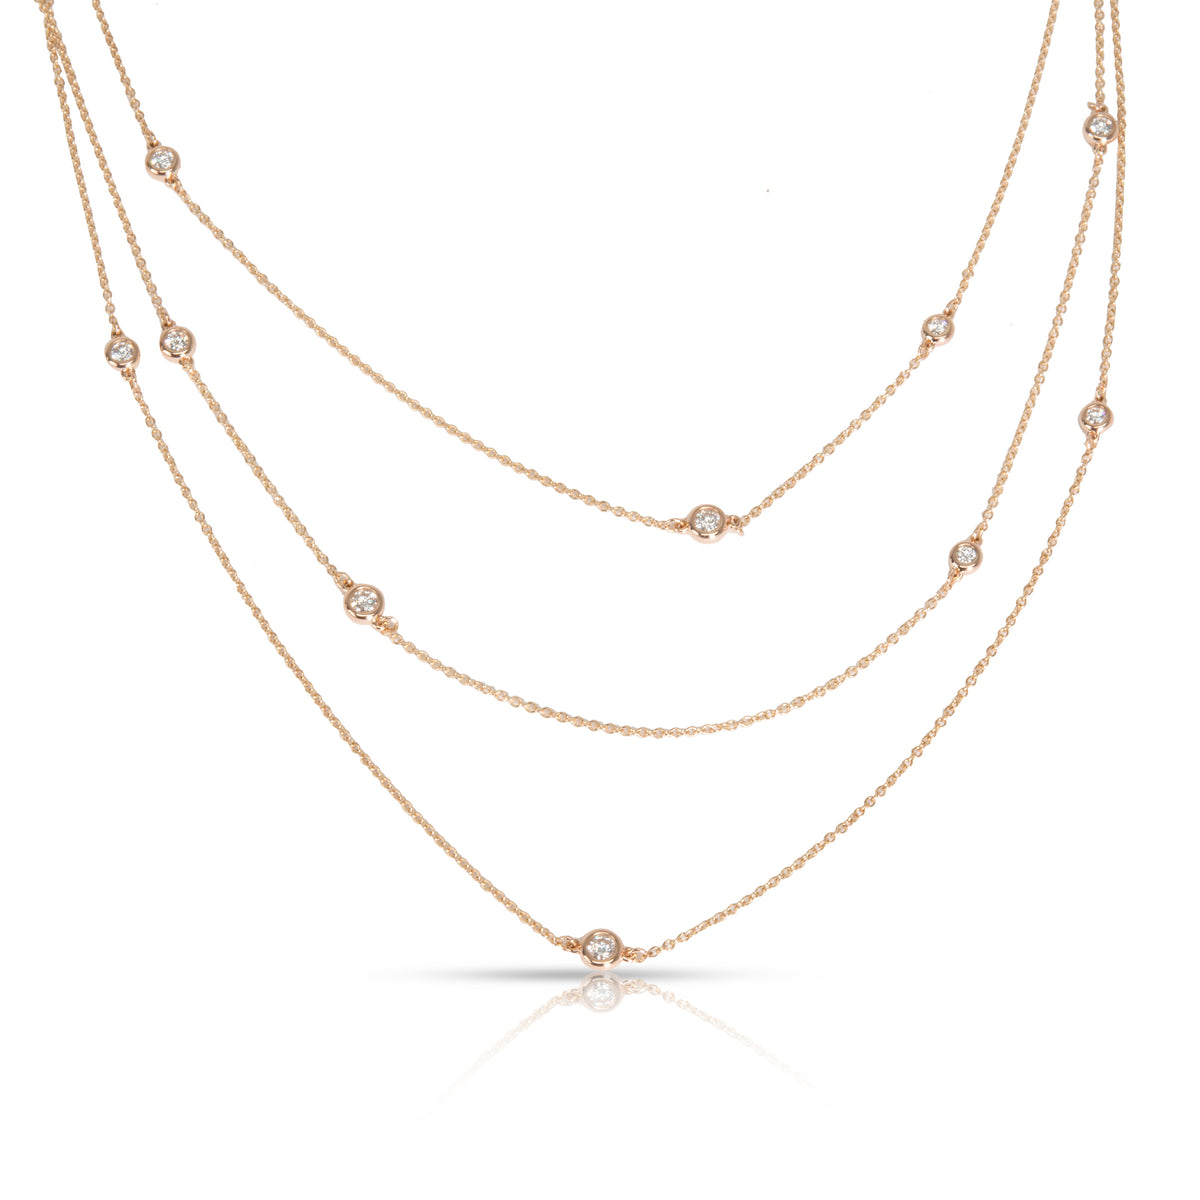 Tiffany & Co. Elsa Peretti Diamonds by the Yard 18K Rose Gold Necklace 1.20ctw